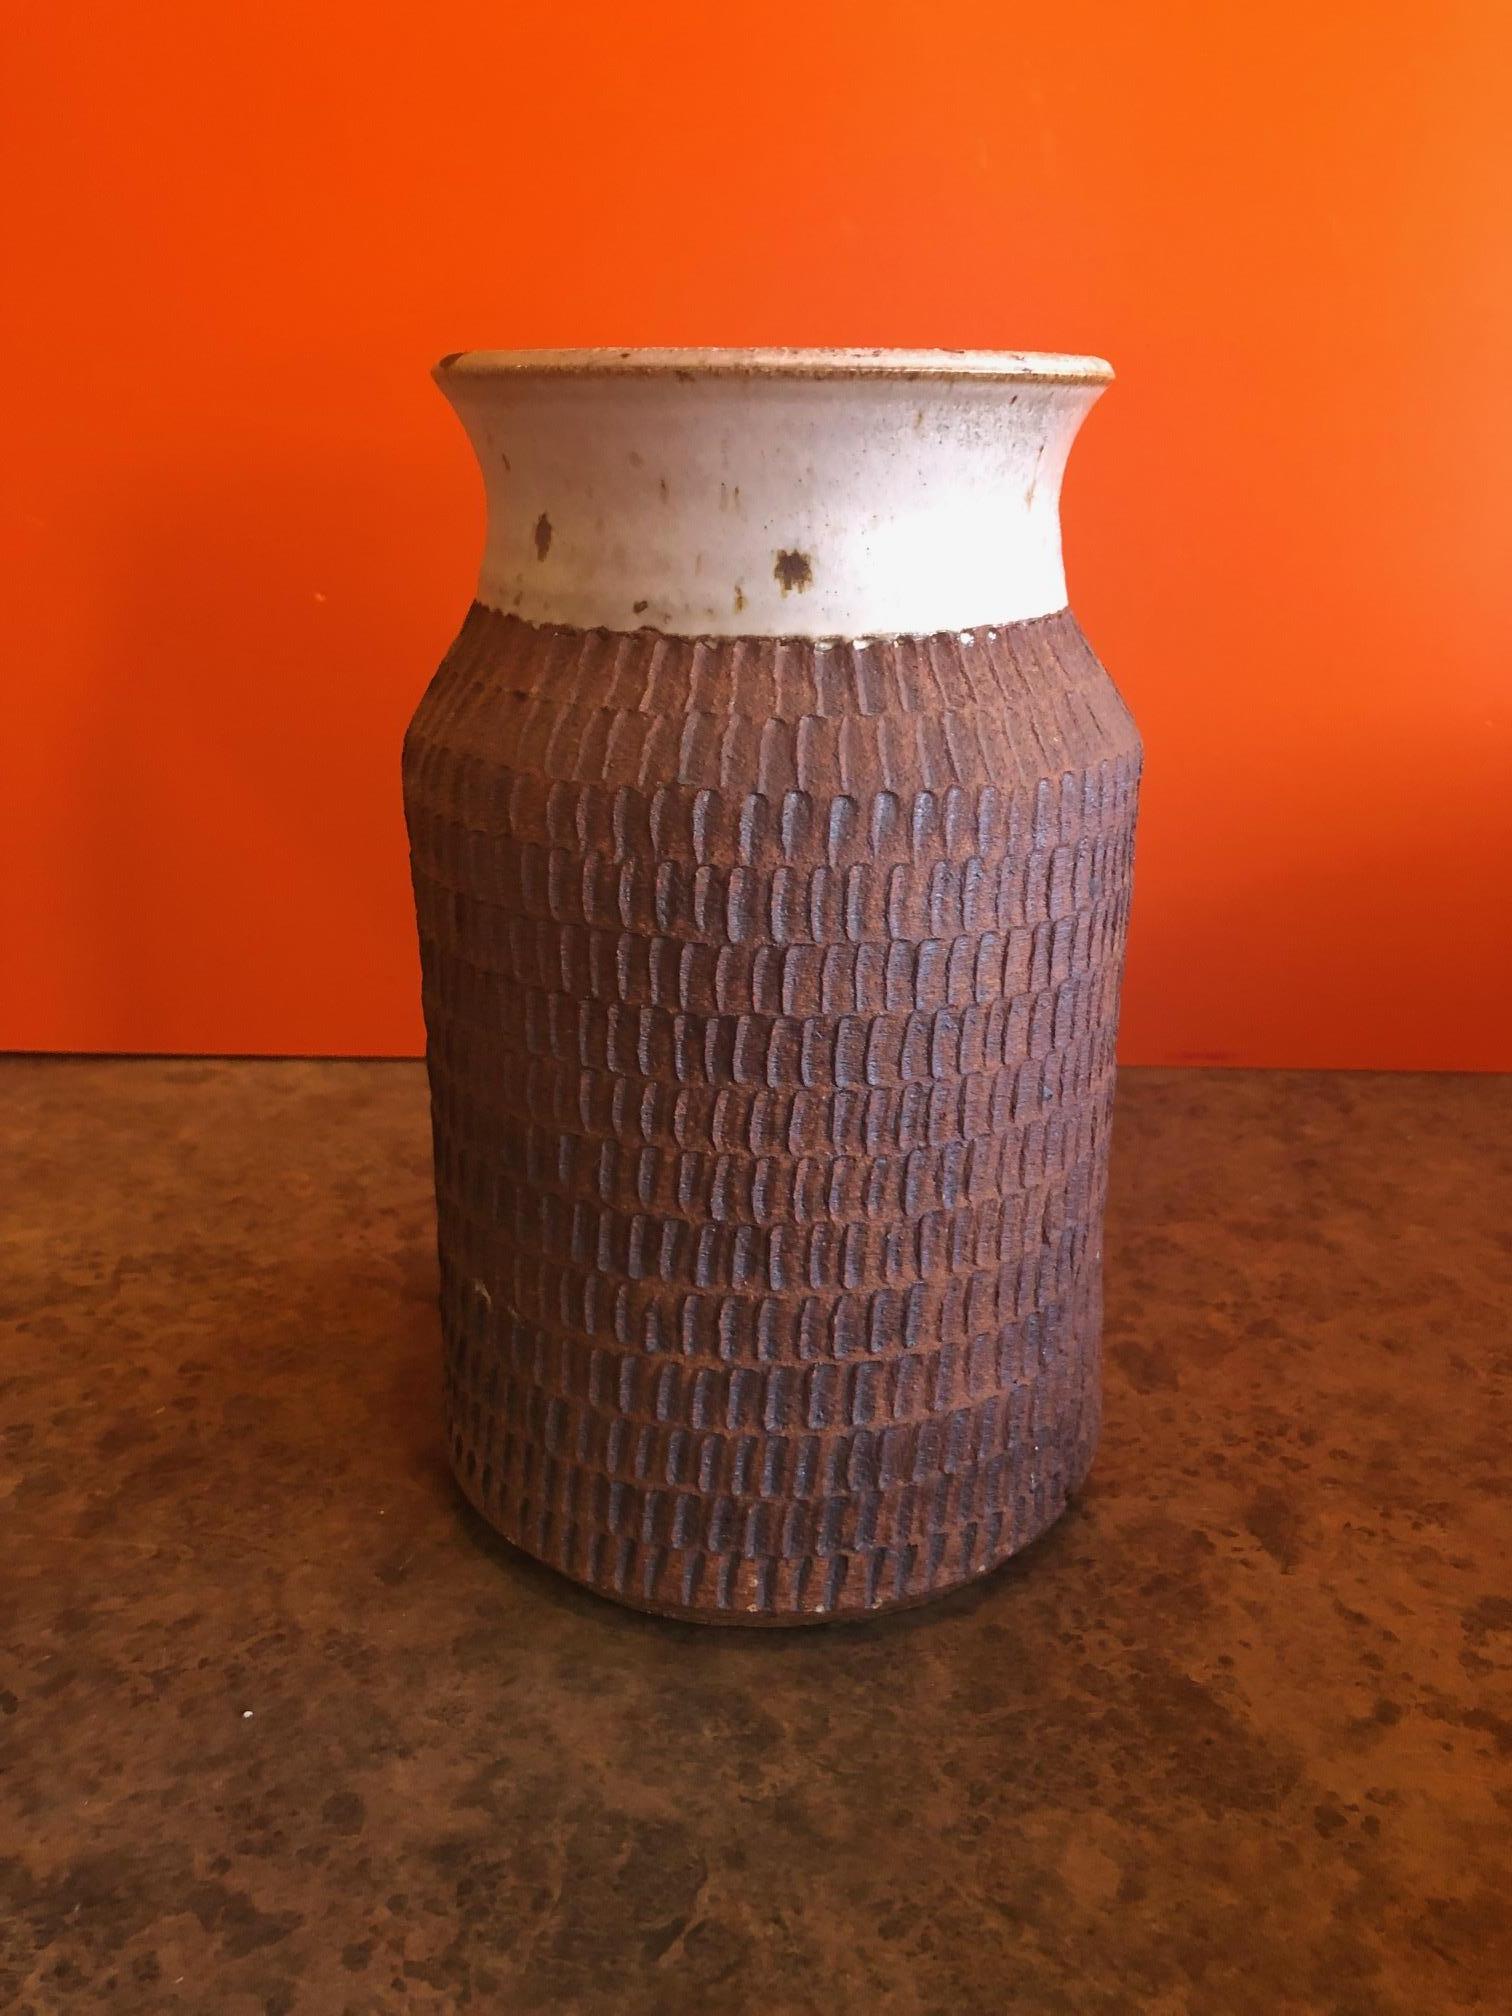 Lovely earthenware pottery jar / vase in the style of David Cressey / Robert Maxwell, circa 1970s. The piece is 5.75